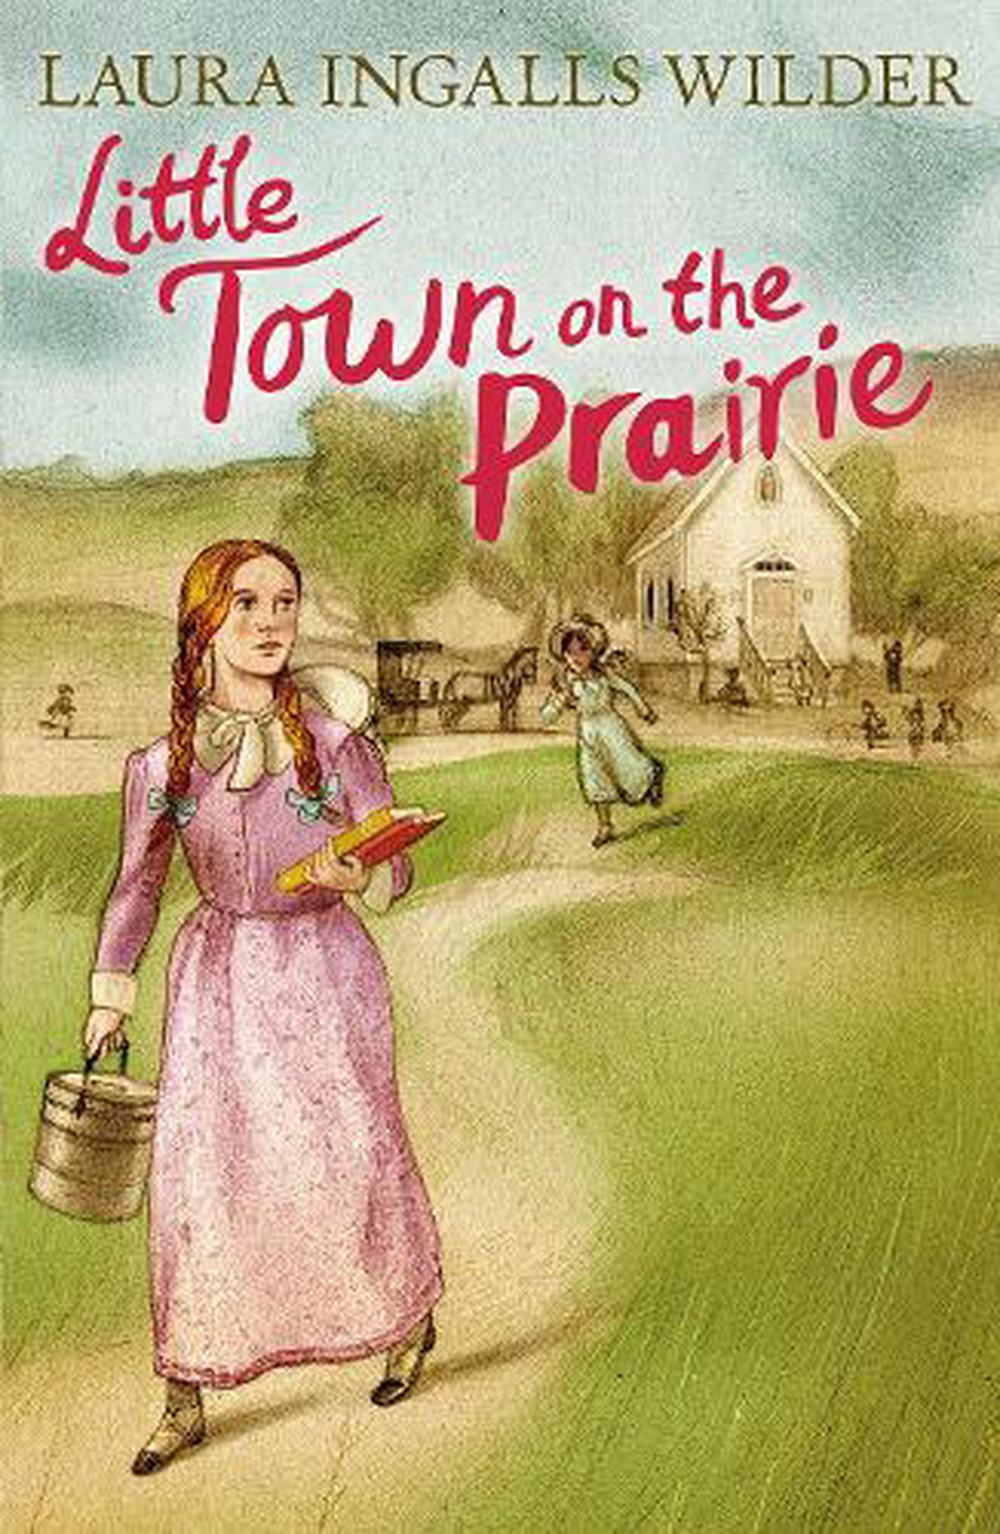 9781405280167　The　Wilder,　Little　at　on　online　Buy　Prairie　the　Paperback,　Ingalls　Laura　by　Town　Nile